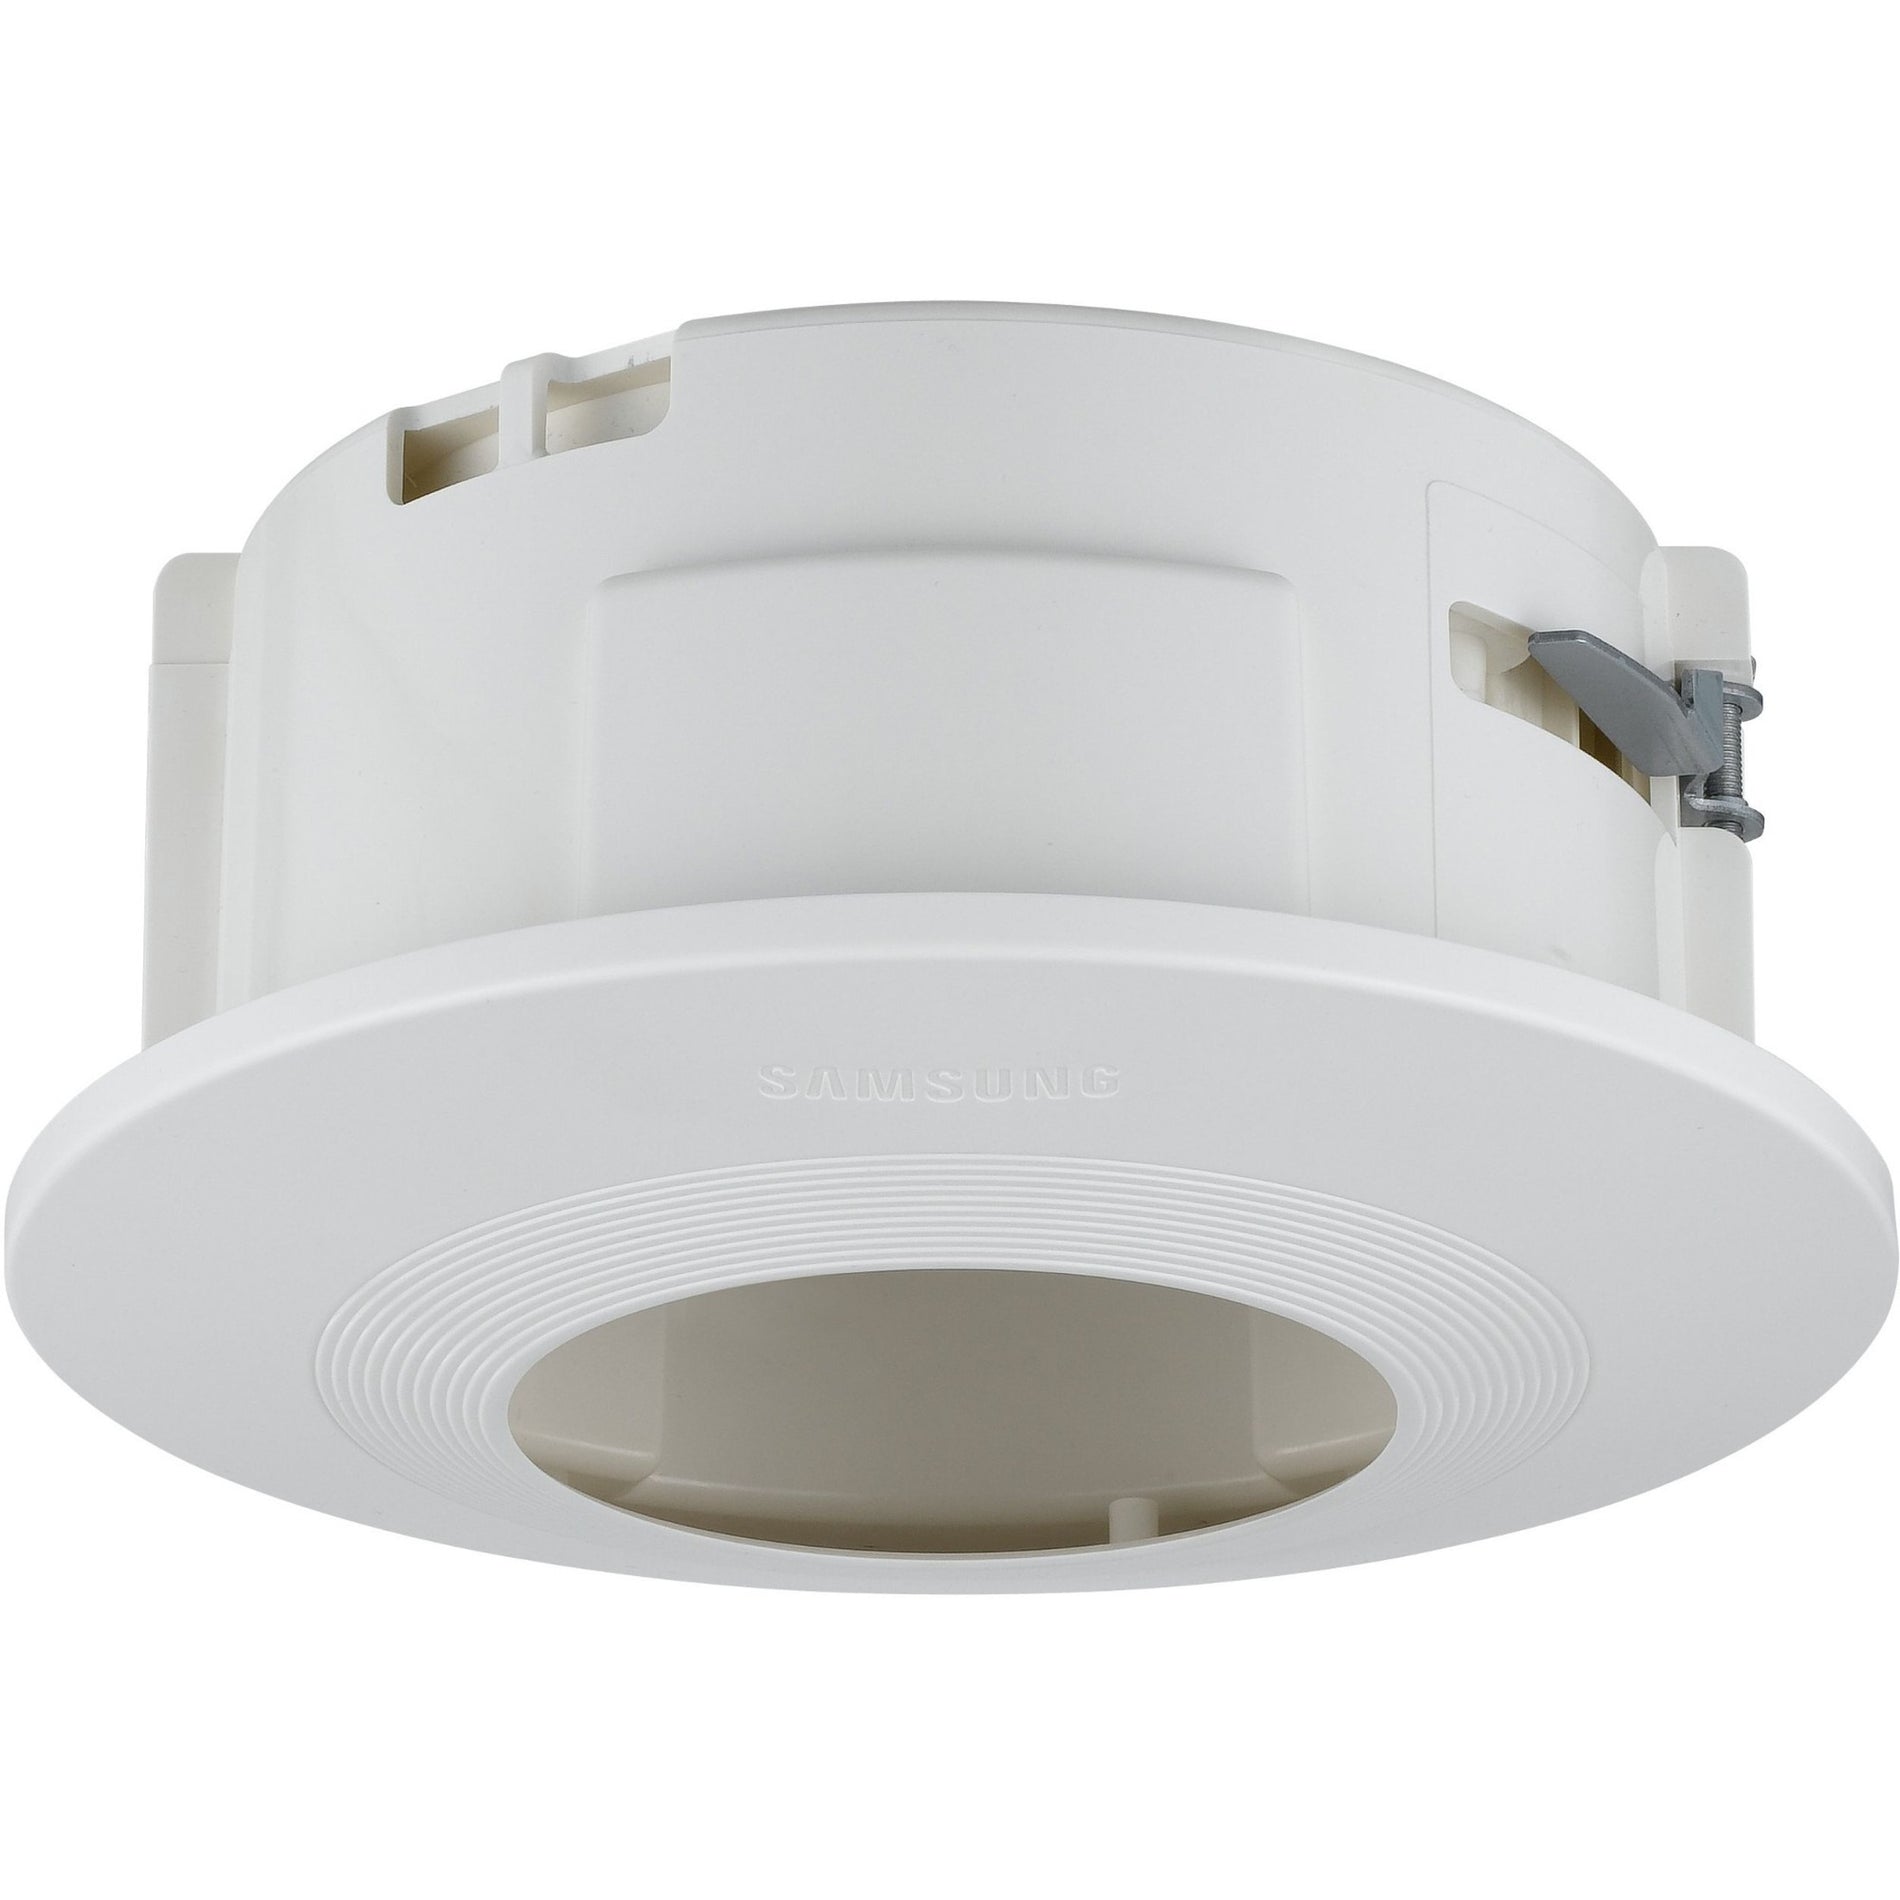 Hanwha Techwin SHD-3000F3 In-ceiling Flush Mount for Network Camera, Ivory